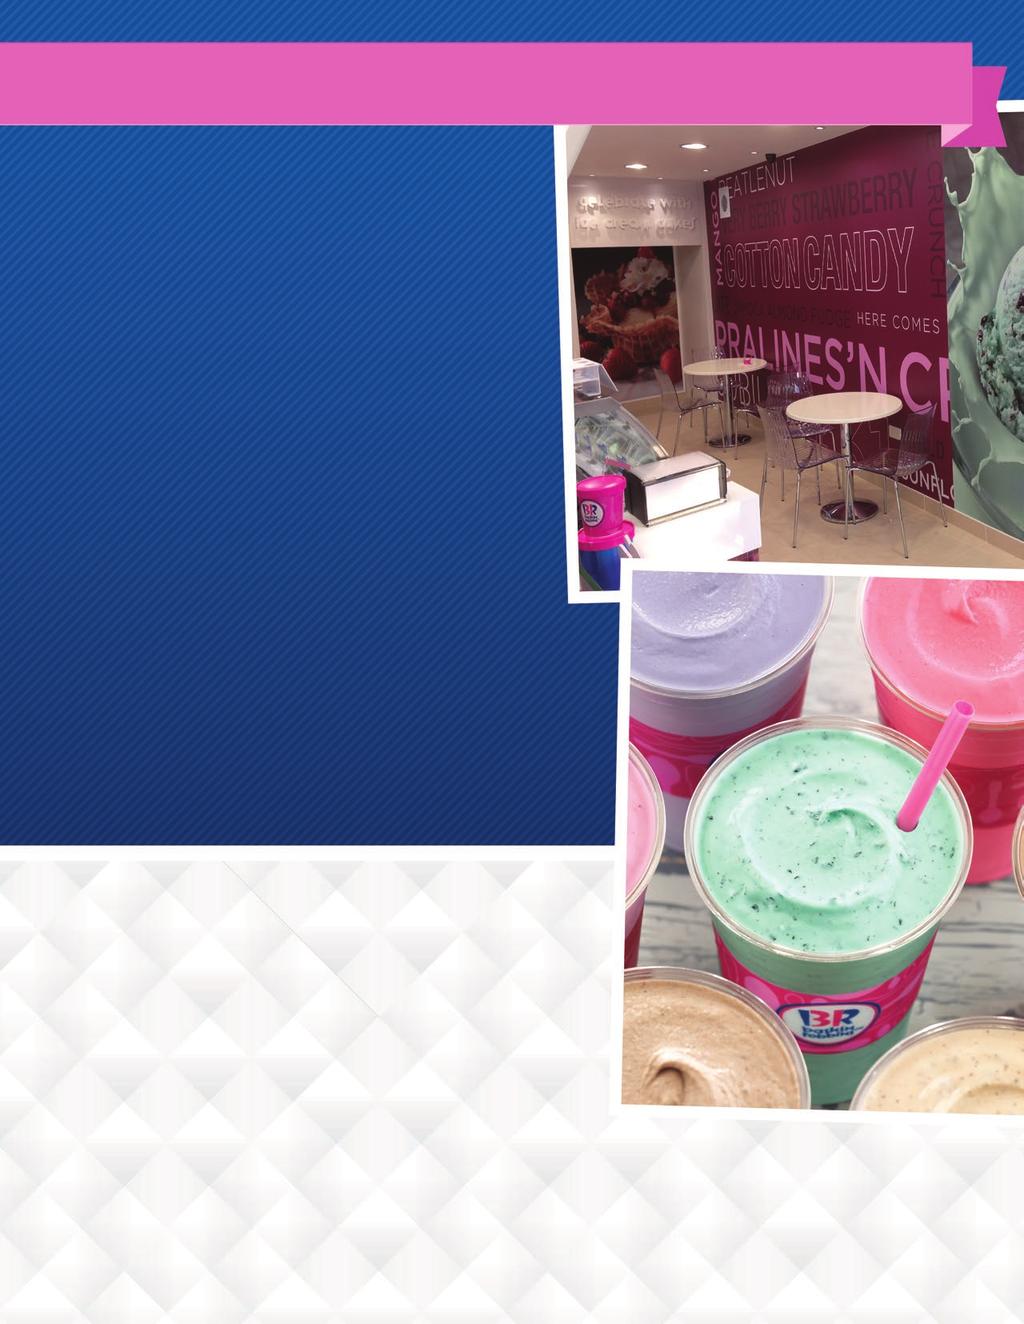 training, systems & Field support Baskin-Robbins provides a comprehensive operating system designed to help build business along with a world-class training program that covers branding, business